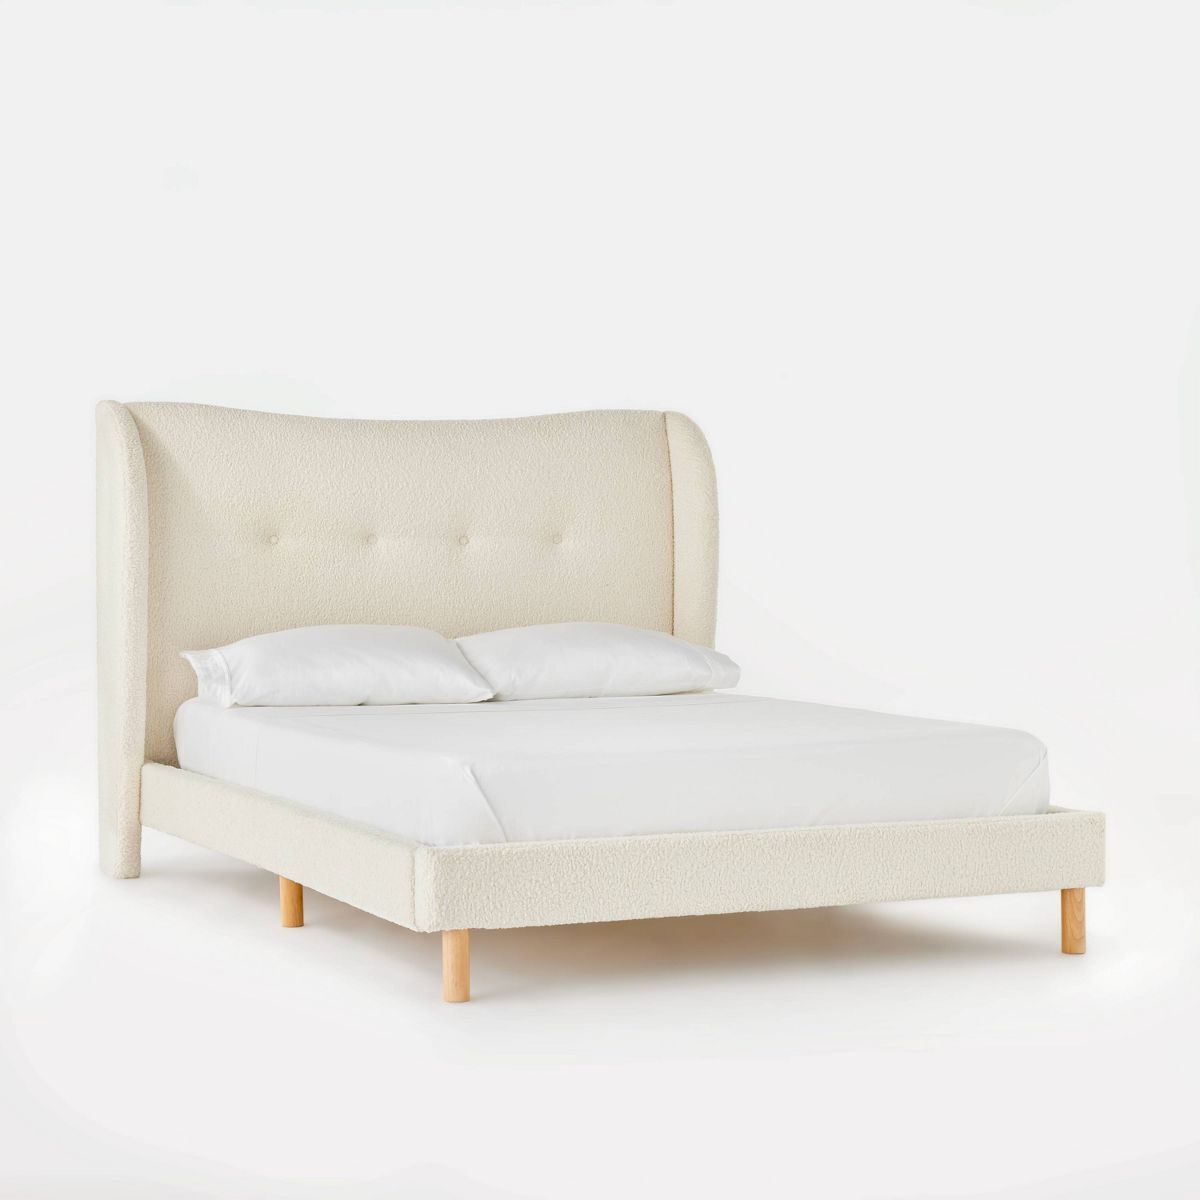 King Kessler Bed in Cream Faux Shearling - Threshold™ designed with Studio McGee | Target